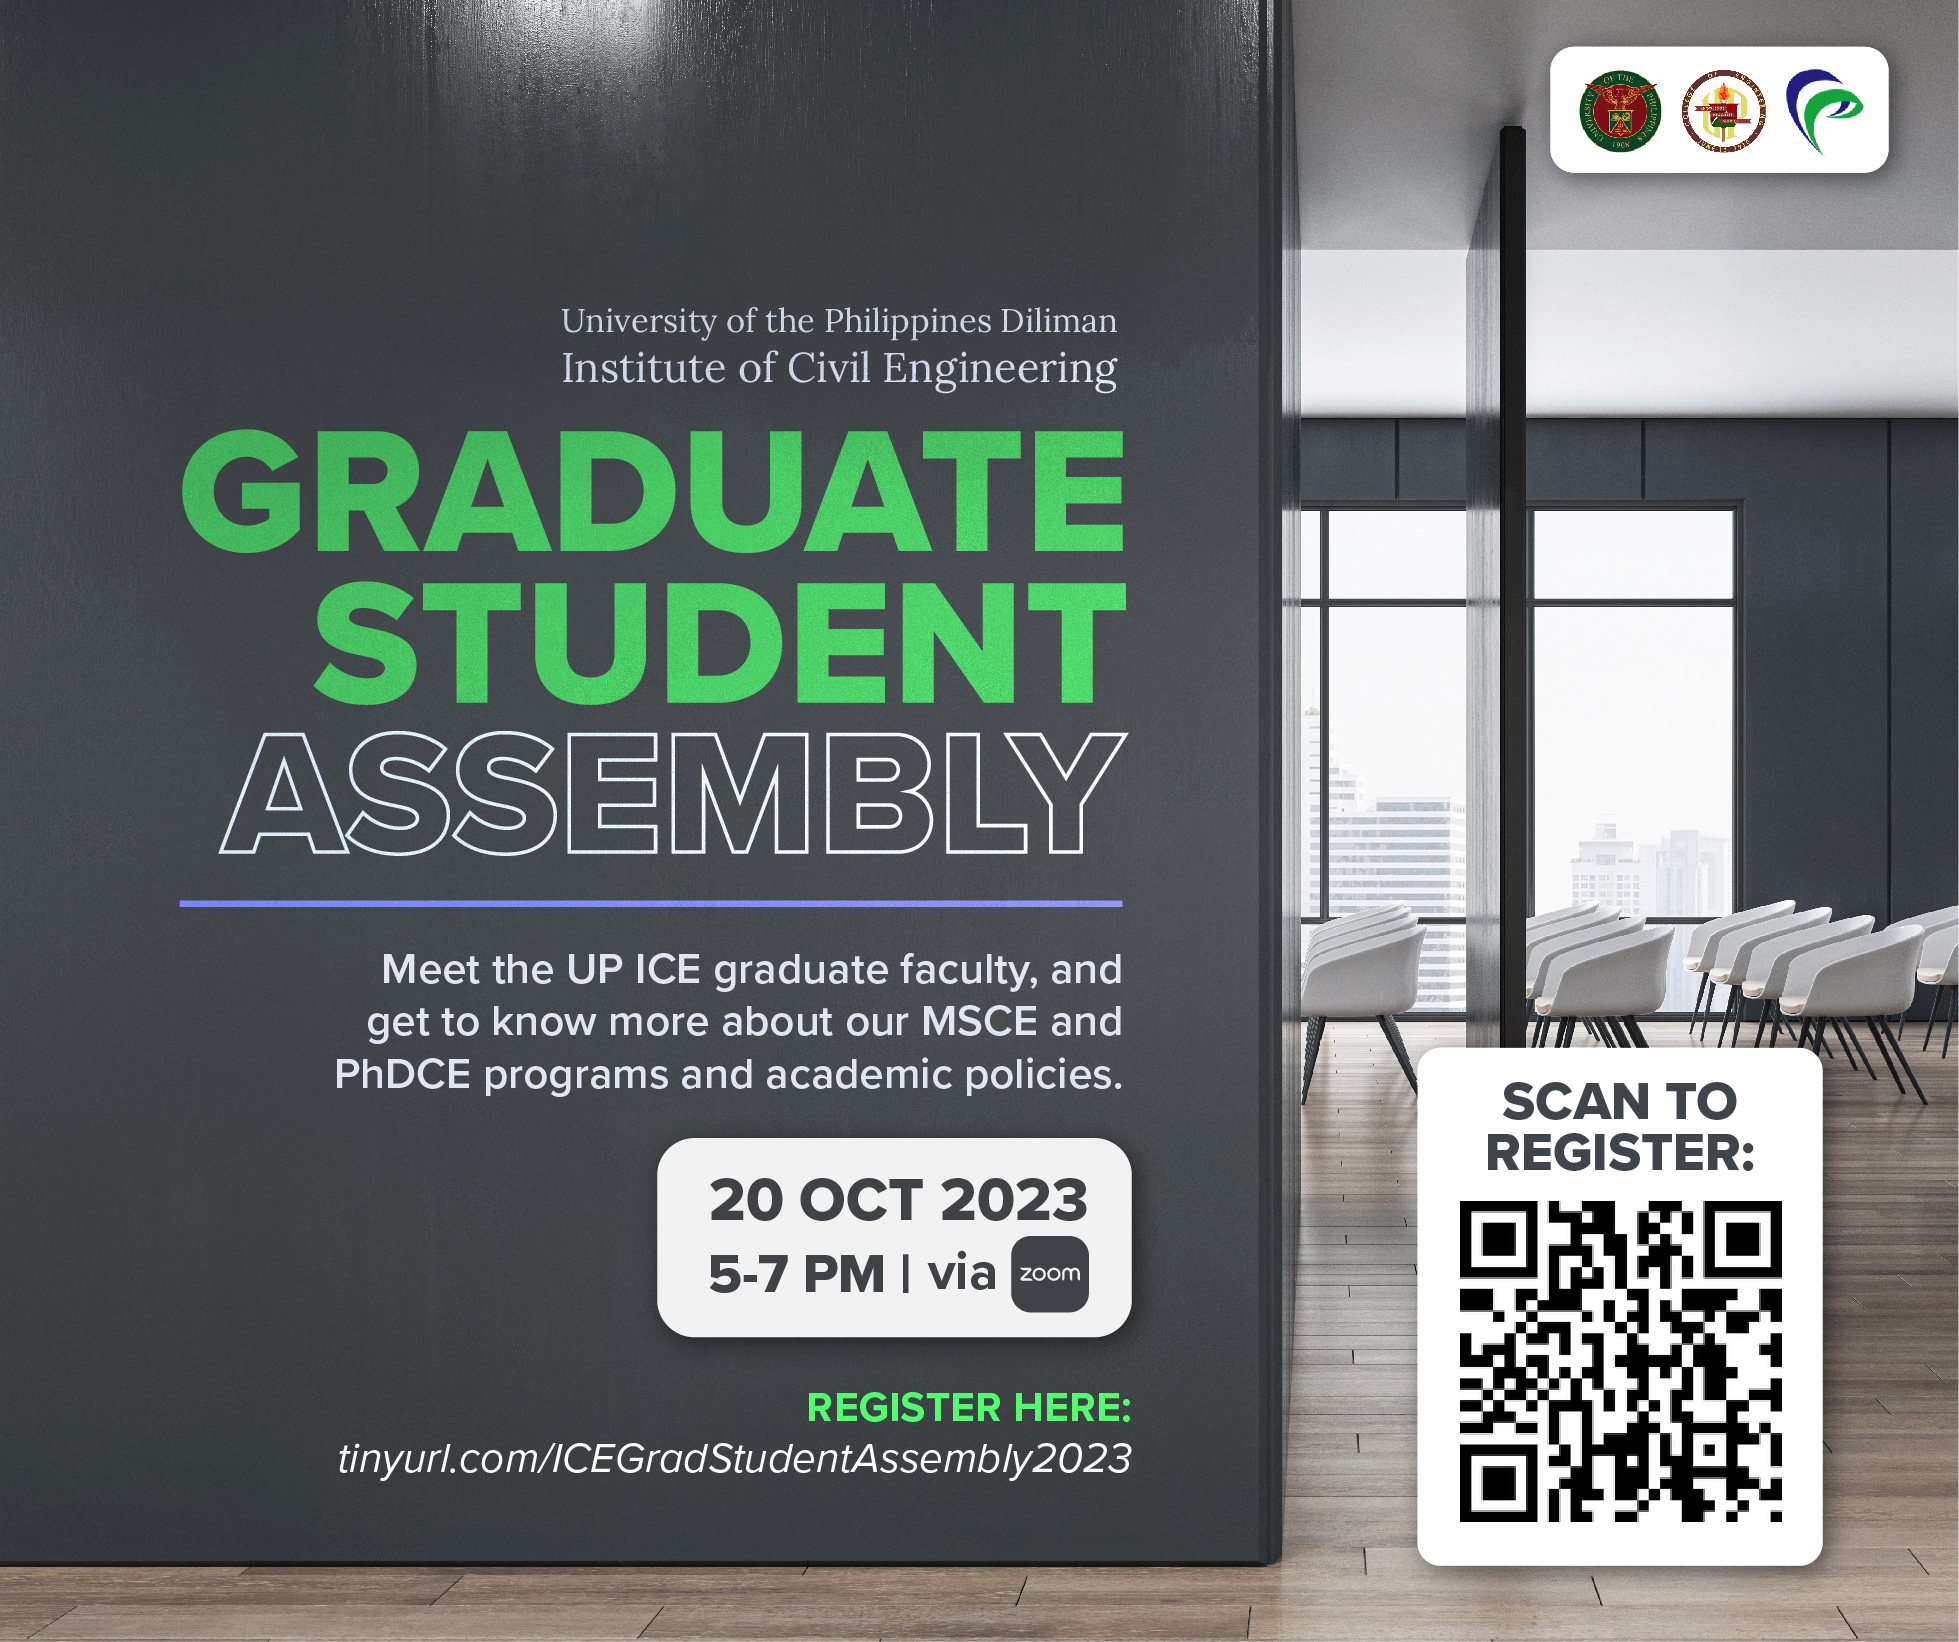 Event: Graduate Student Assembly (20 Oct 2023)